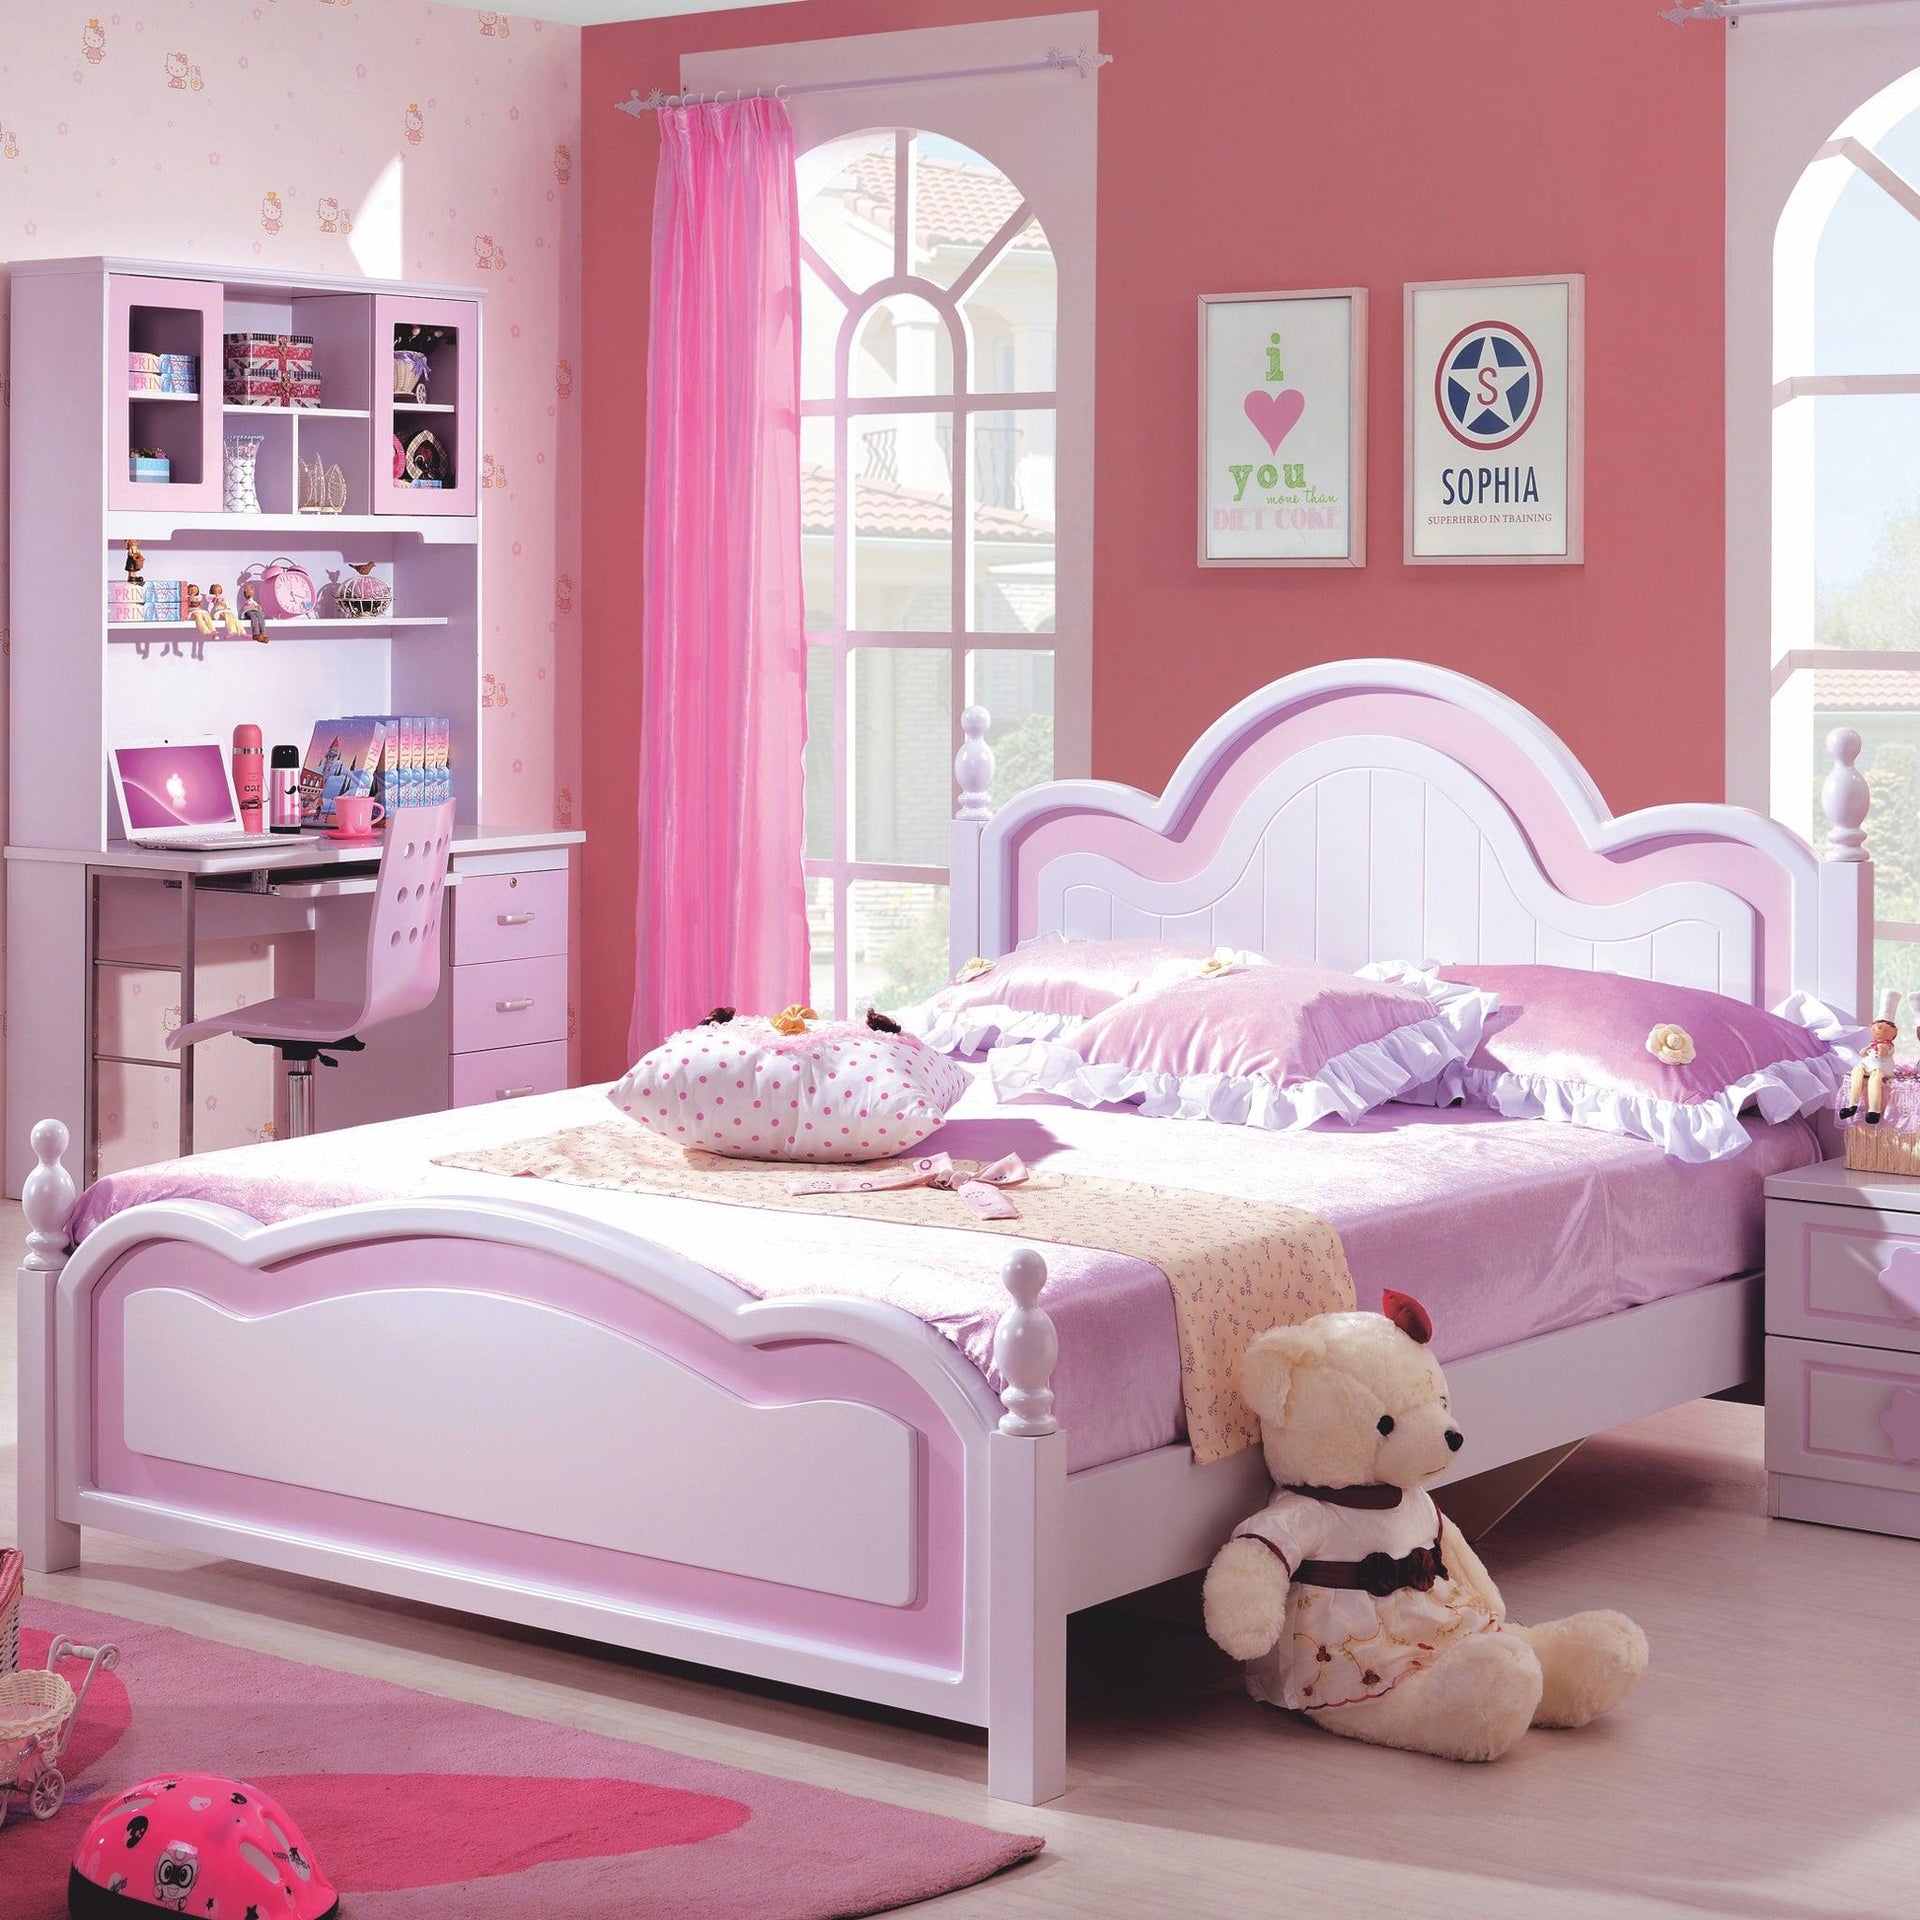 Queen-sized King-sized Bed in Singapore - Kids Haven